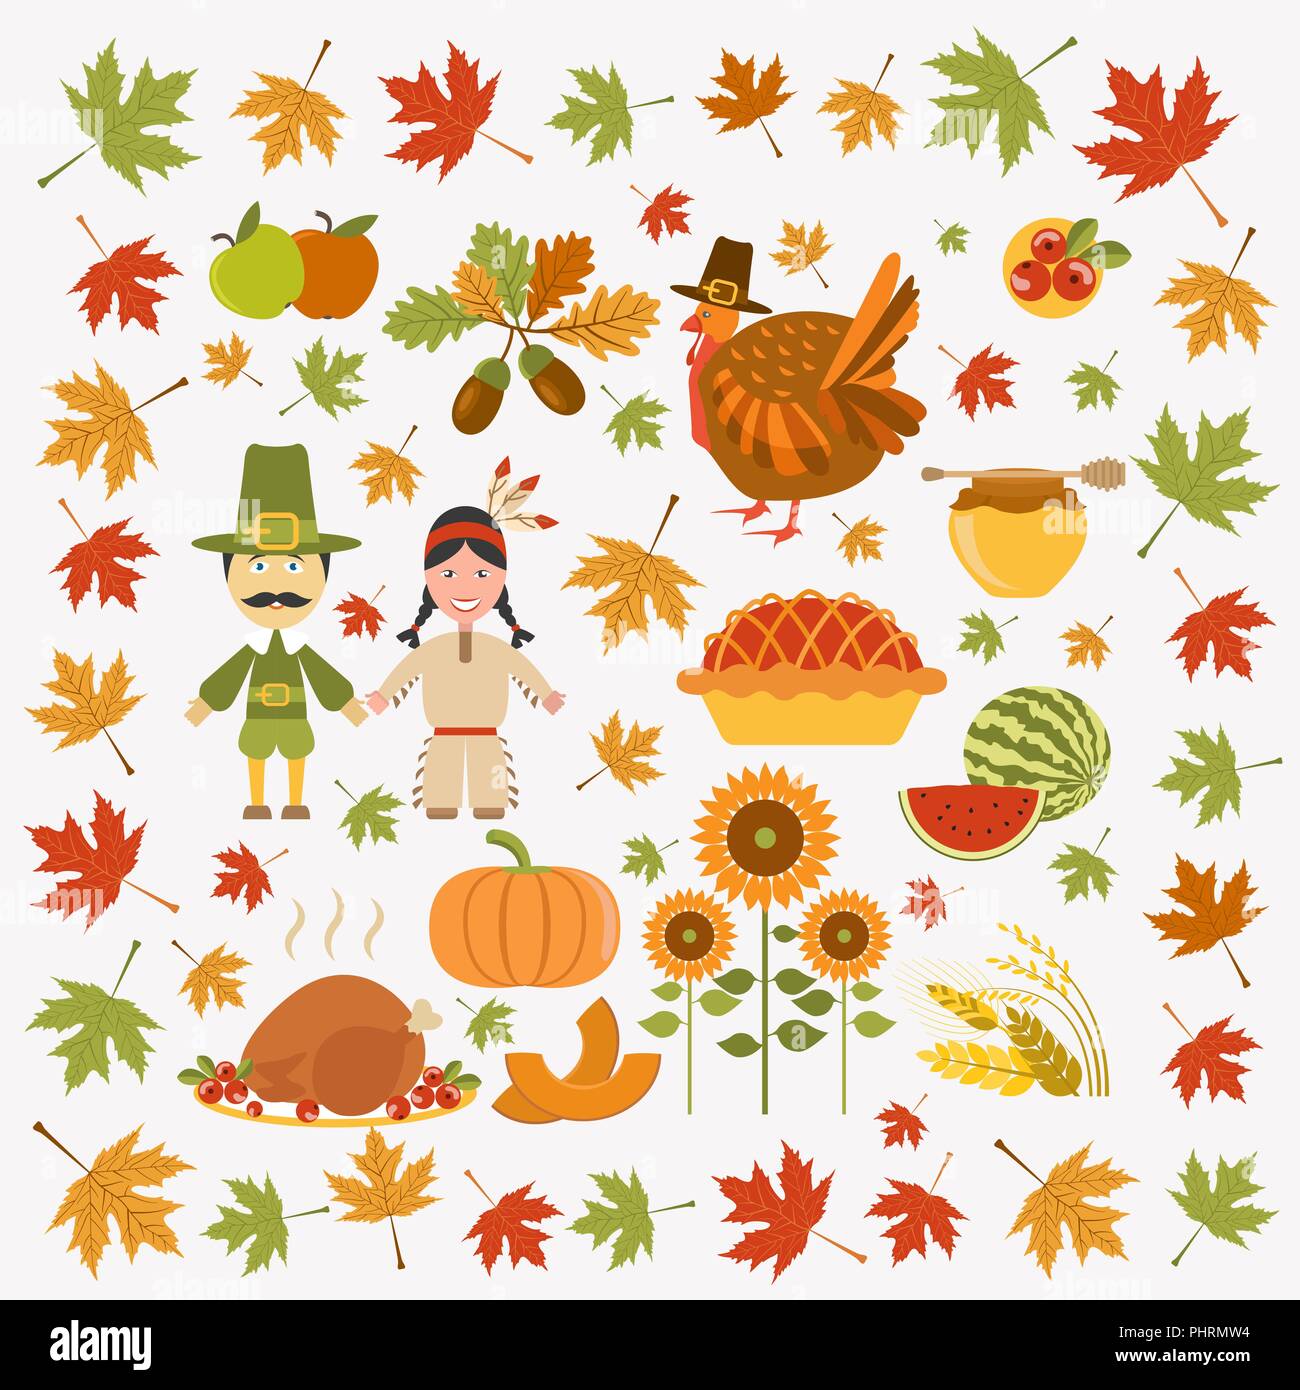 Thanksgiving day icon set. Flat style. Vector illustration Stock Vector